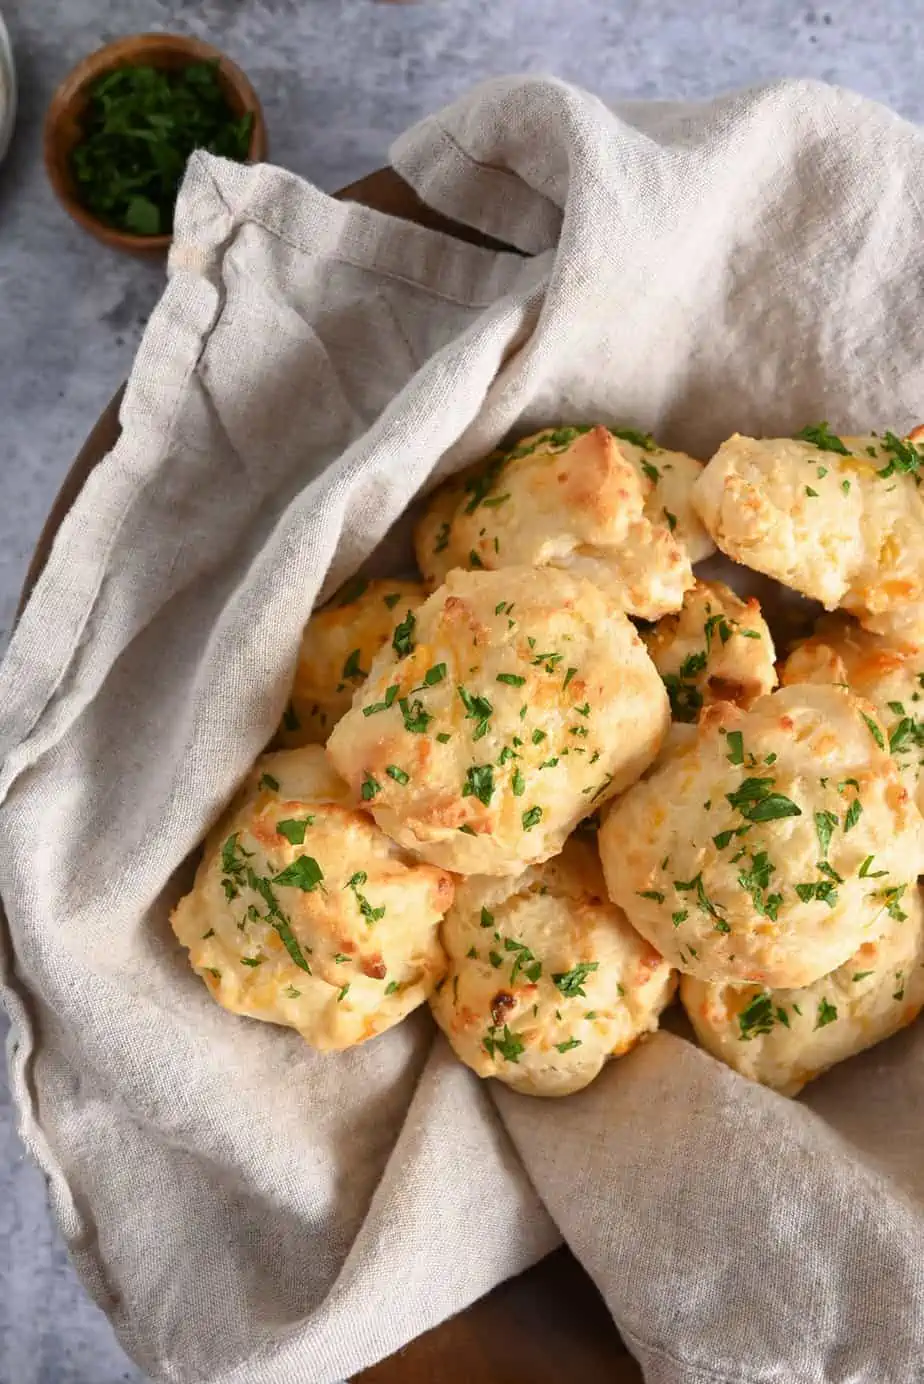 Red Lobster Cheddar Biscuits - Immaculate Bites